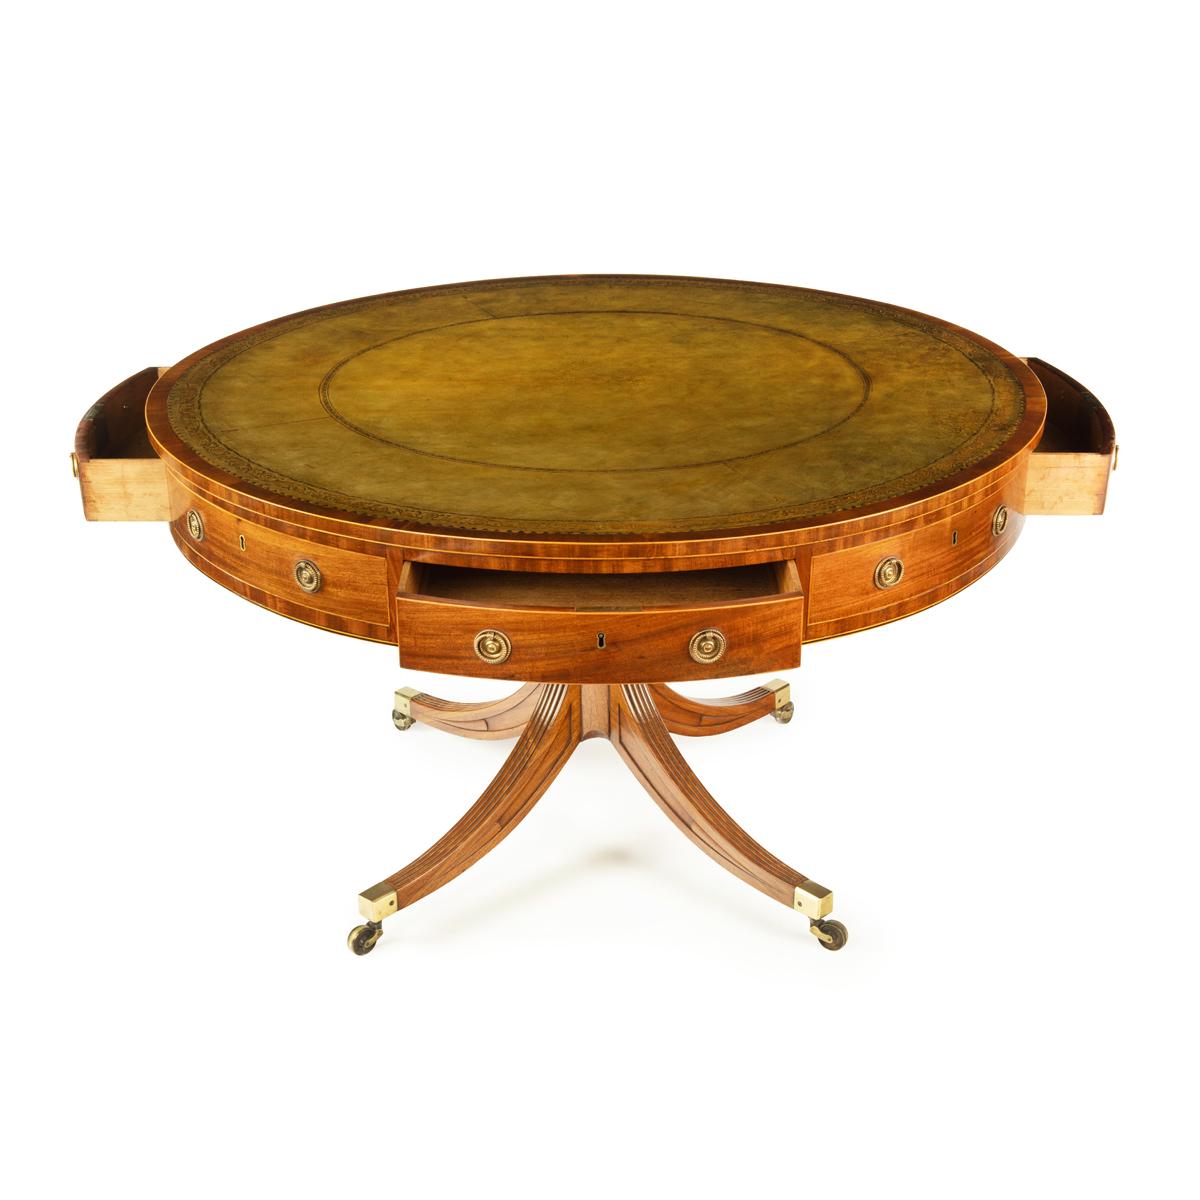 A late George III revolving mahogany drum table attributed to Gillows, the circular top inset with a faded and gilt tooled green leather above four full and four dummy frieze drawers, raised on a turned and gadrooned support with four reeded and